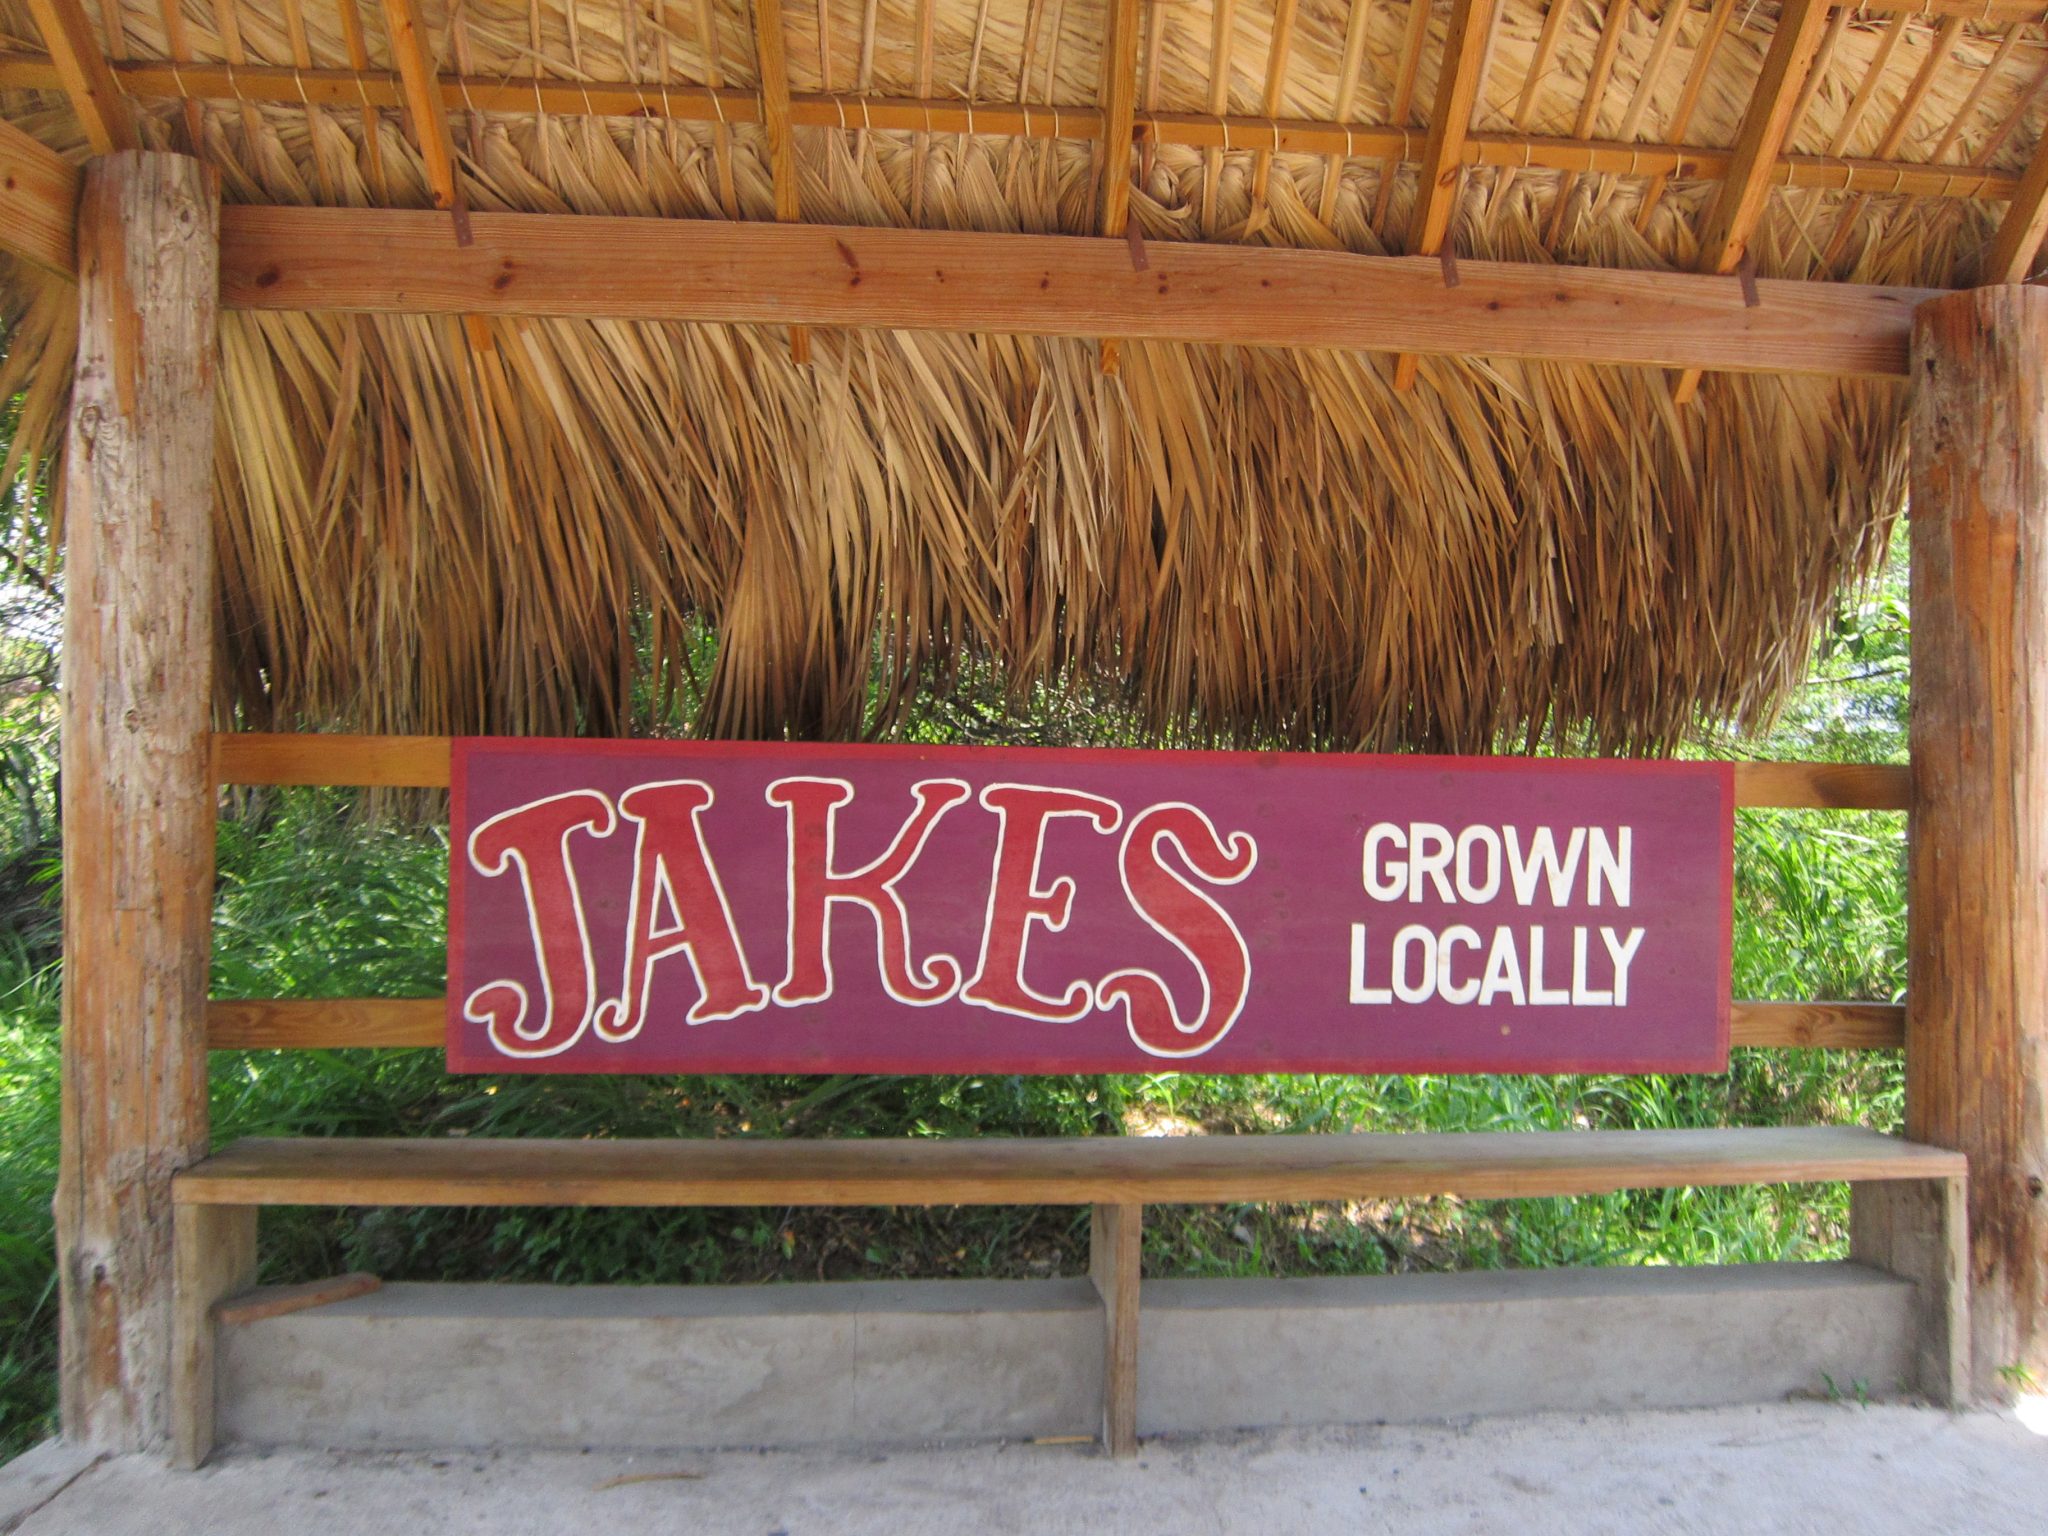 A shaded palm-branch covered bench displays a sign that says "Jakes Grown Locally" in Jamaica.